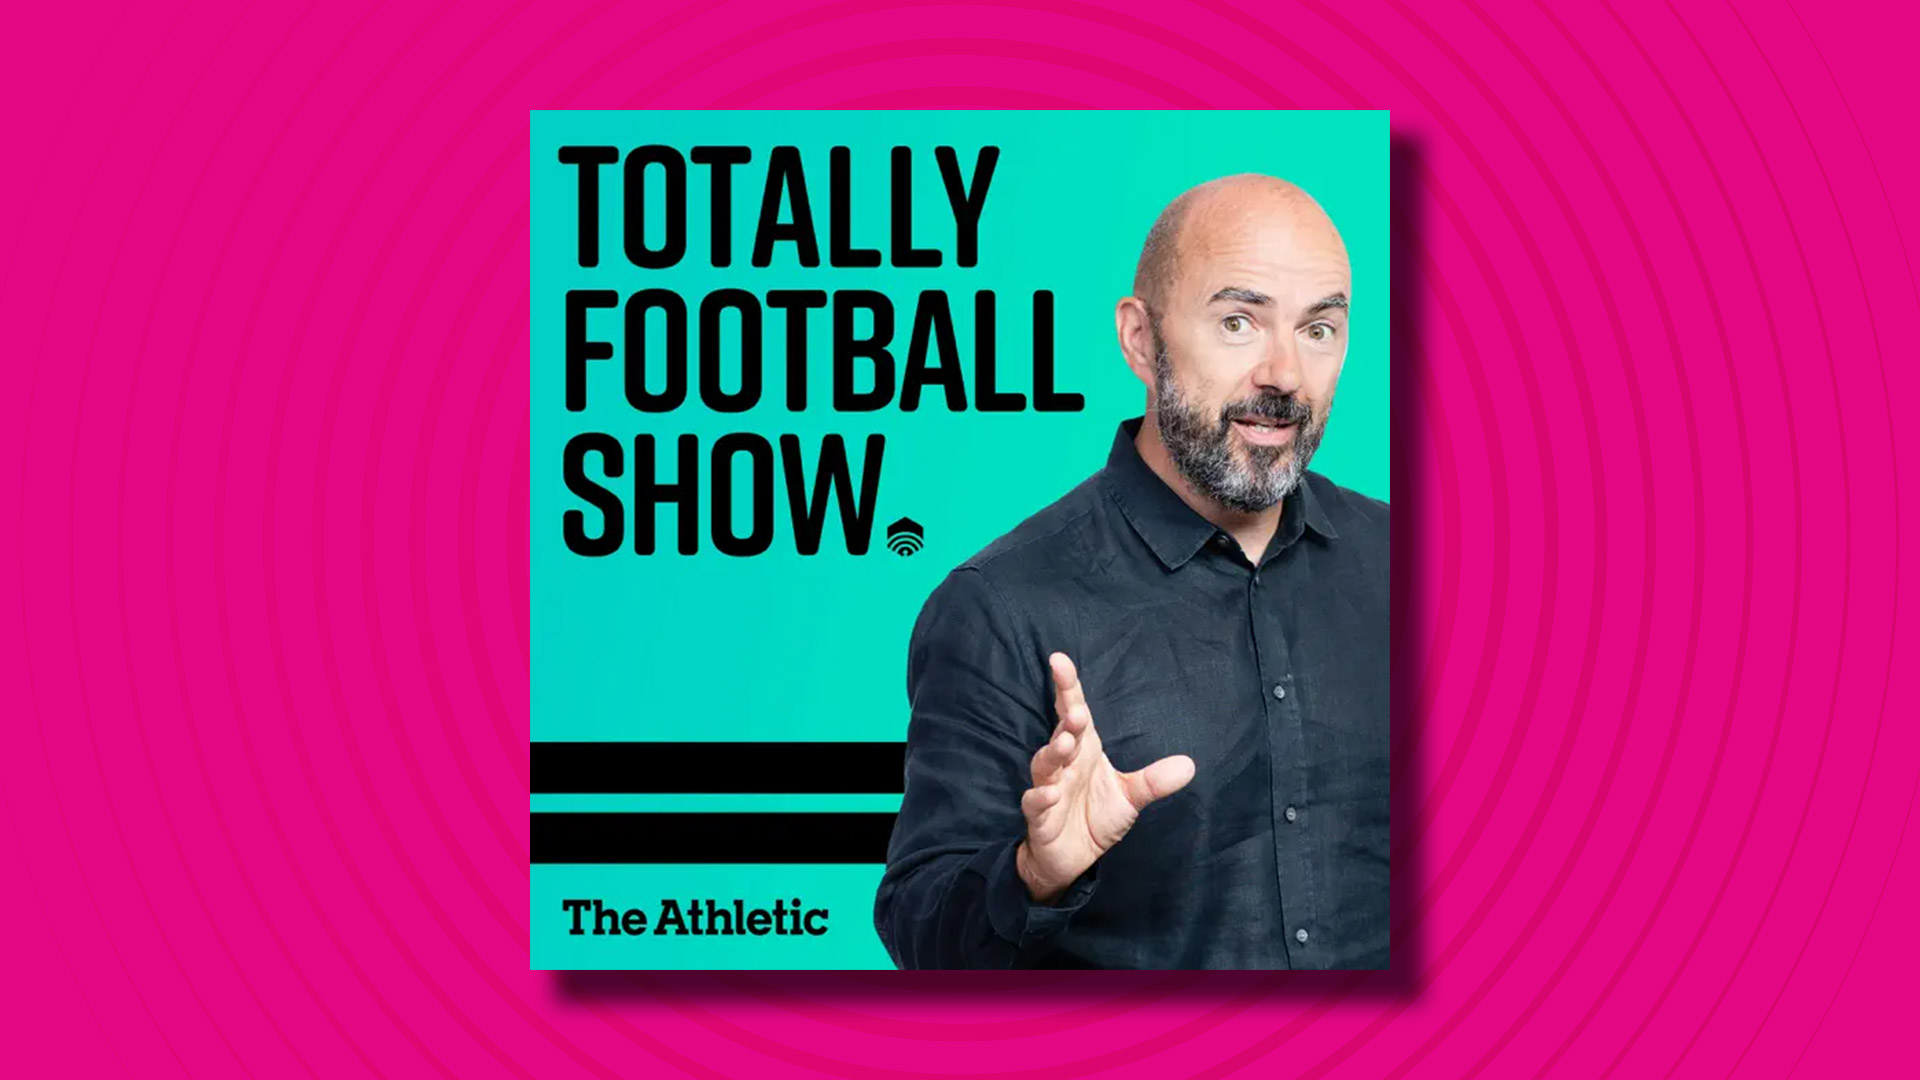 The logo of the Totally Football Show podcast on a pink background